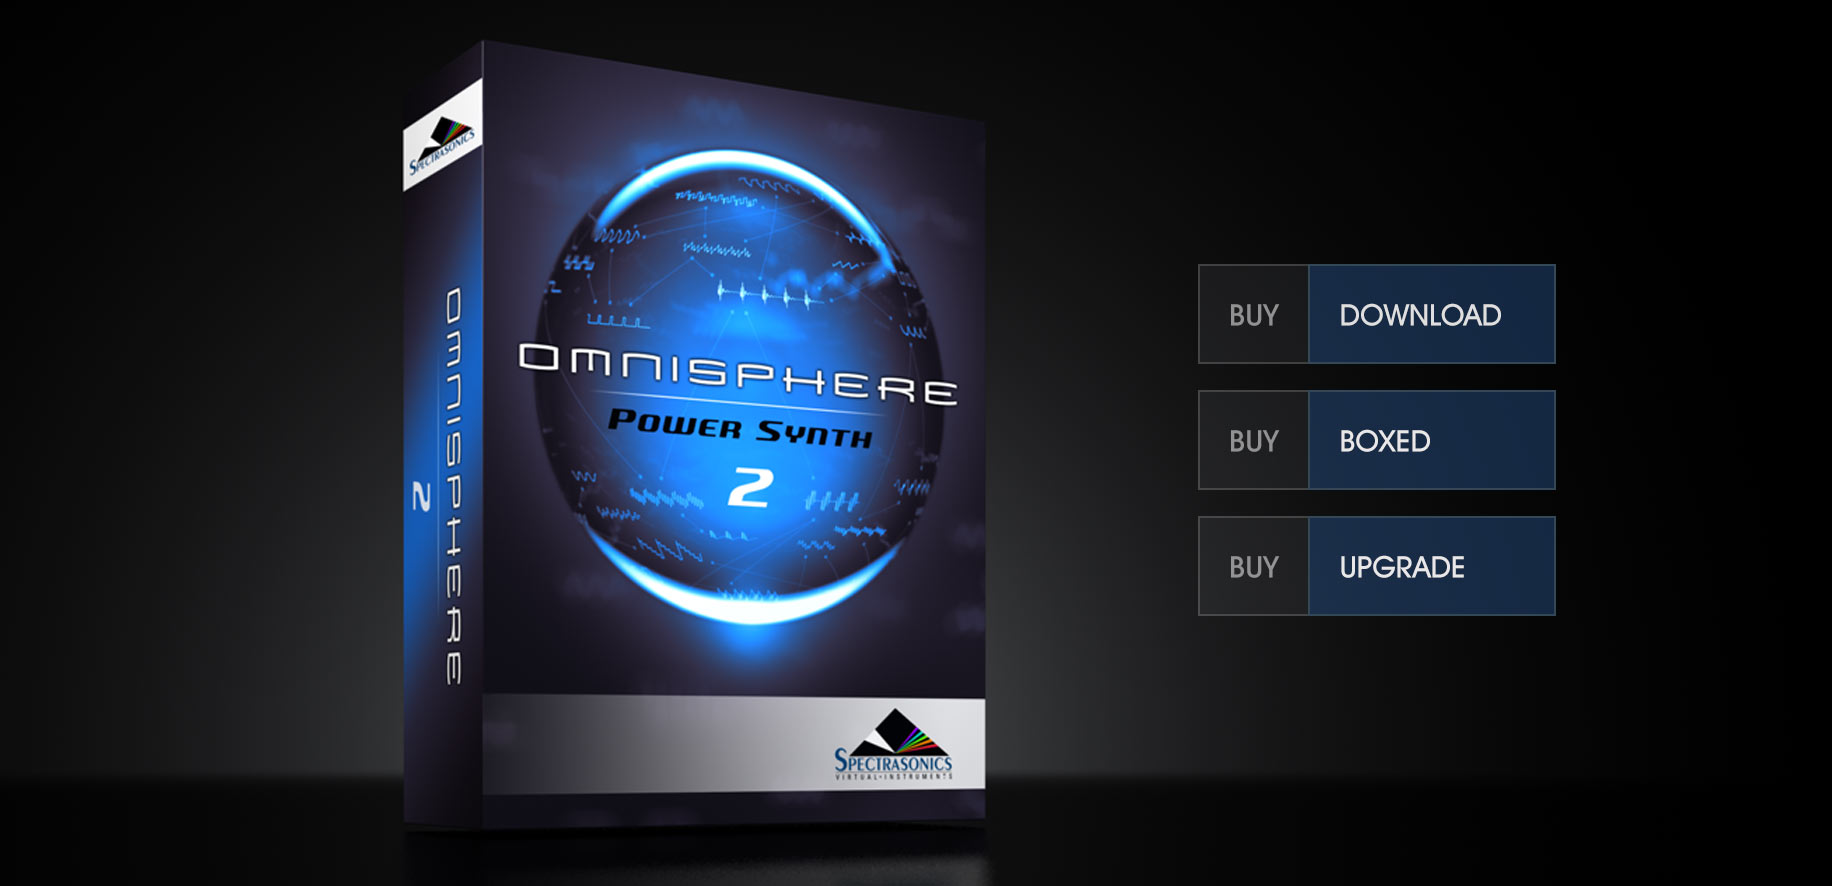 How Long Does It Take To Install Omnisphere 2